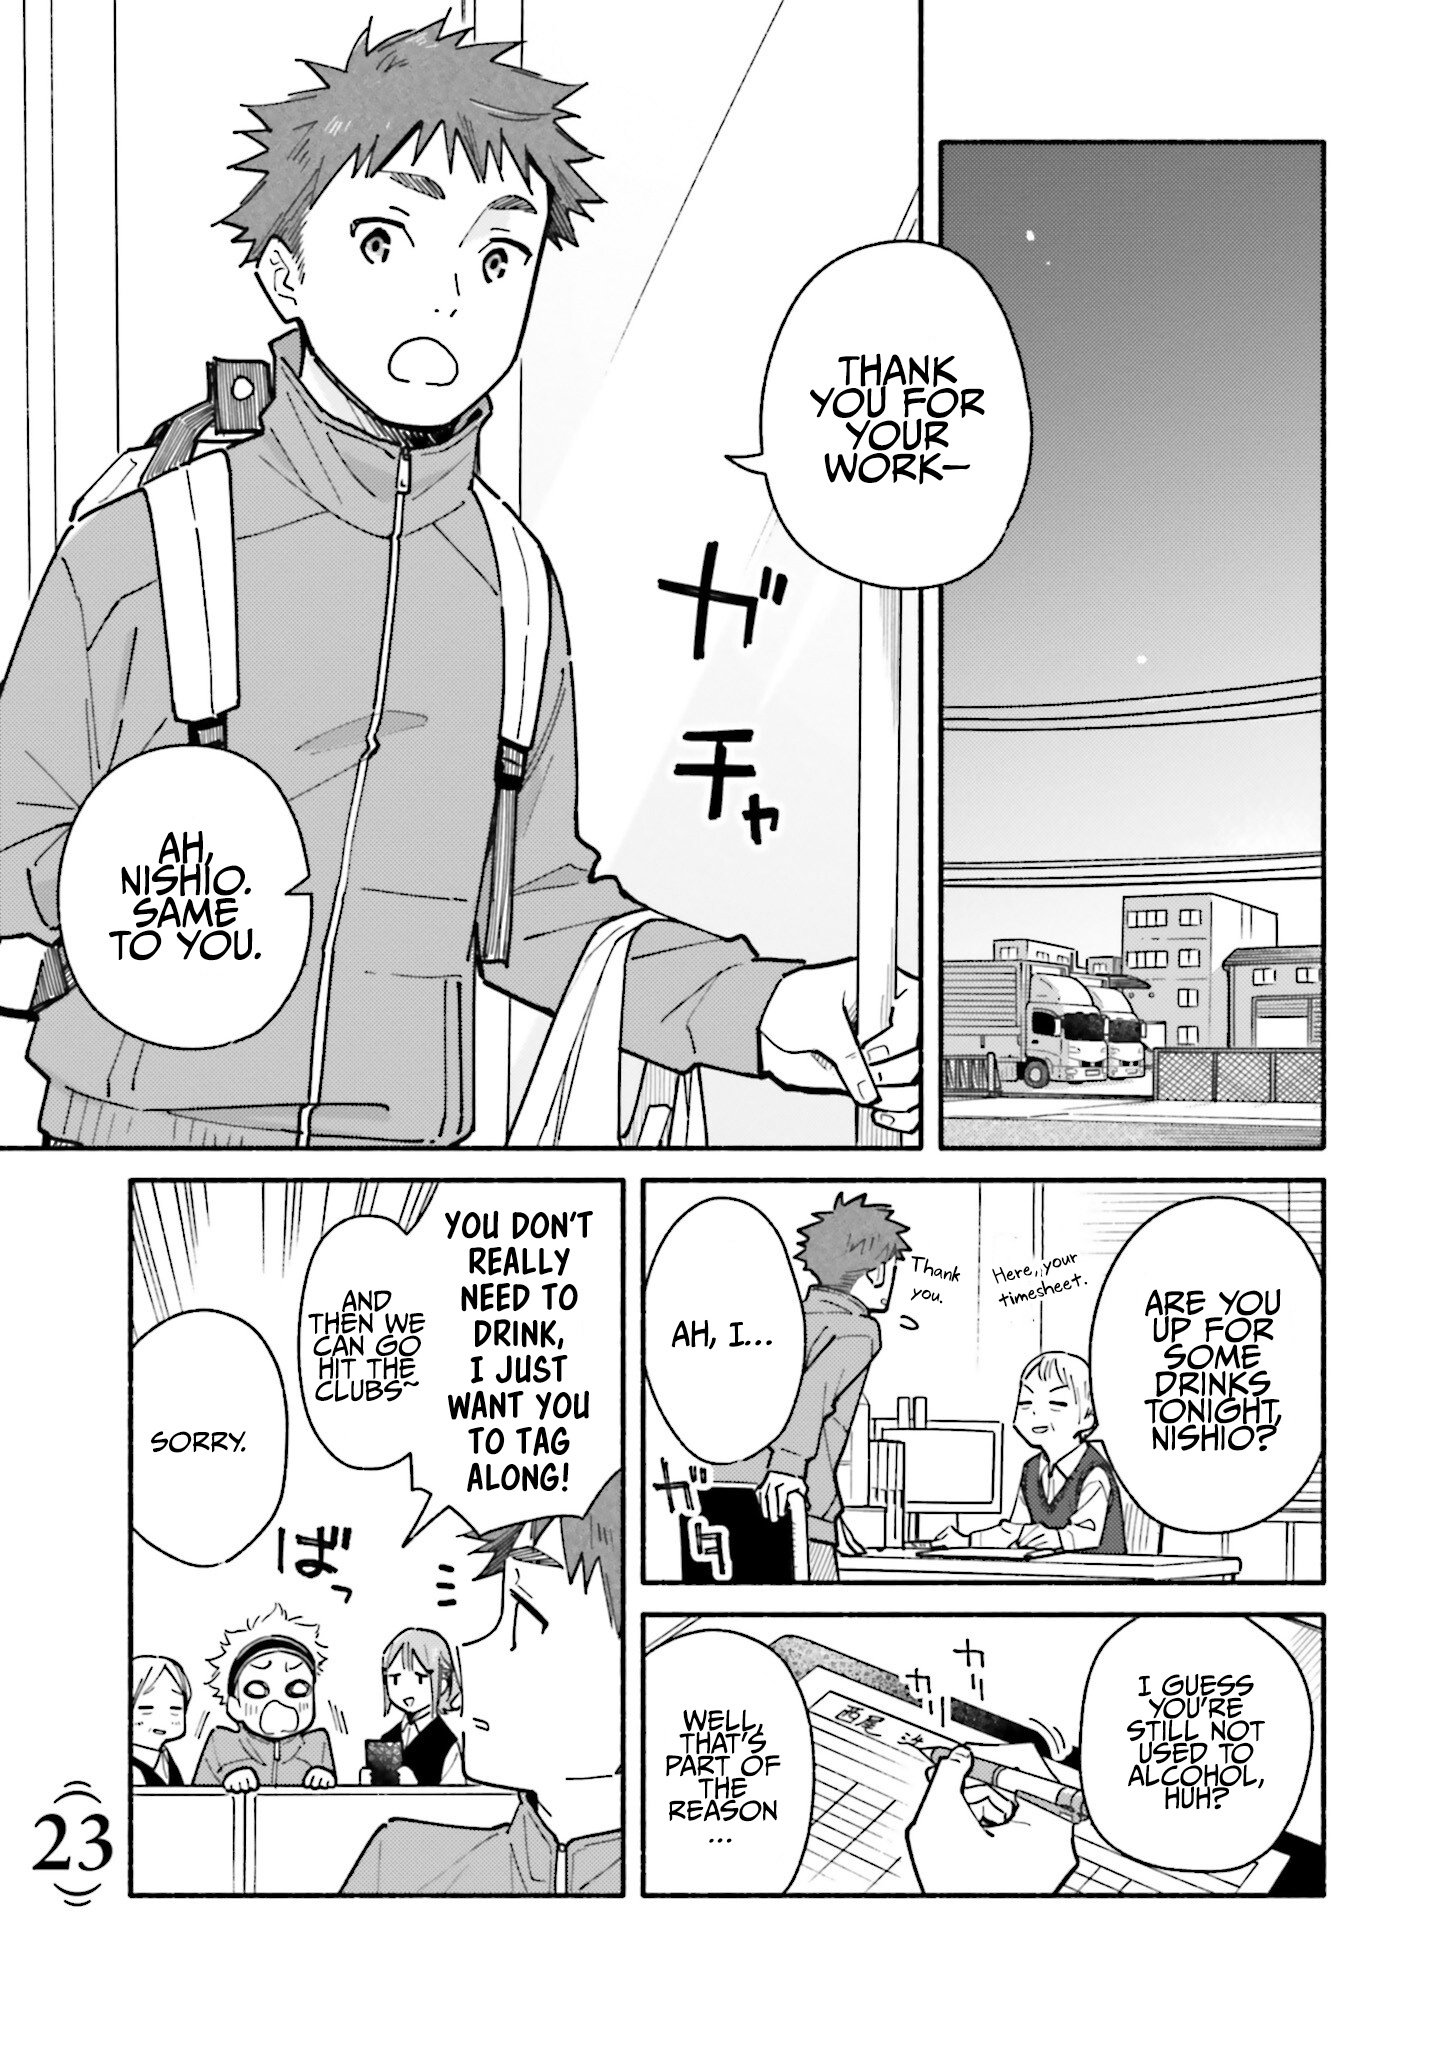 Aikagi-Kun To Shiawase Gohan Vol.4 Chapter 23: A Spare Key And A Happy Meal - Picture 2